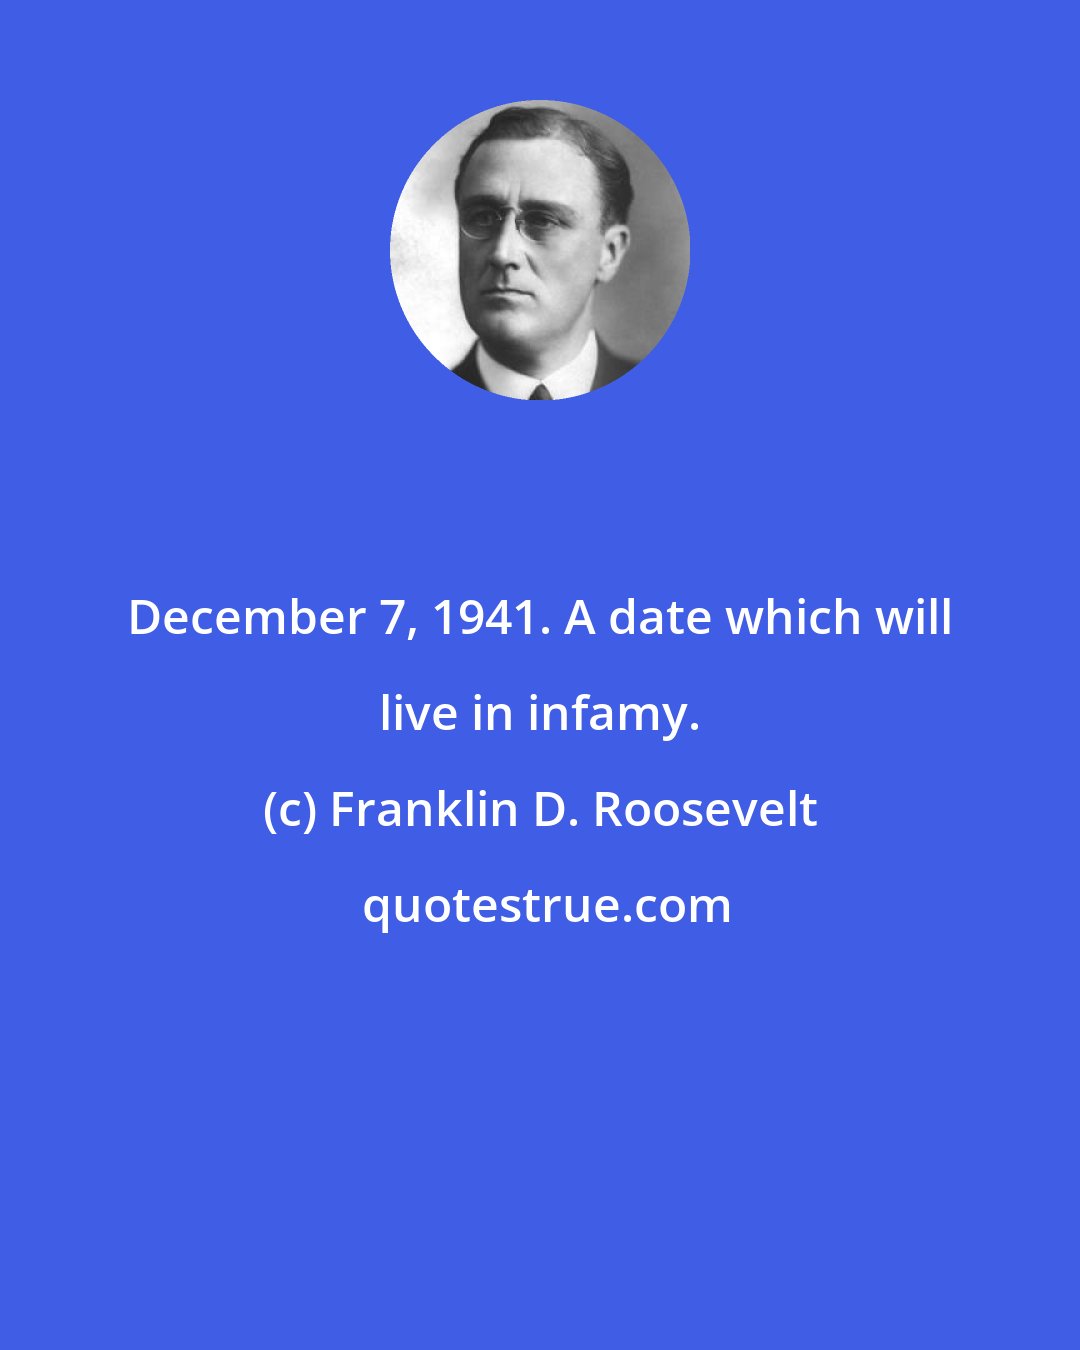 Franklin D. Roosevelt: December 7, 1941. A date which will live in infamy.